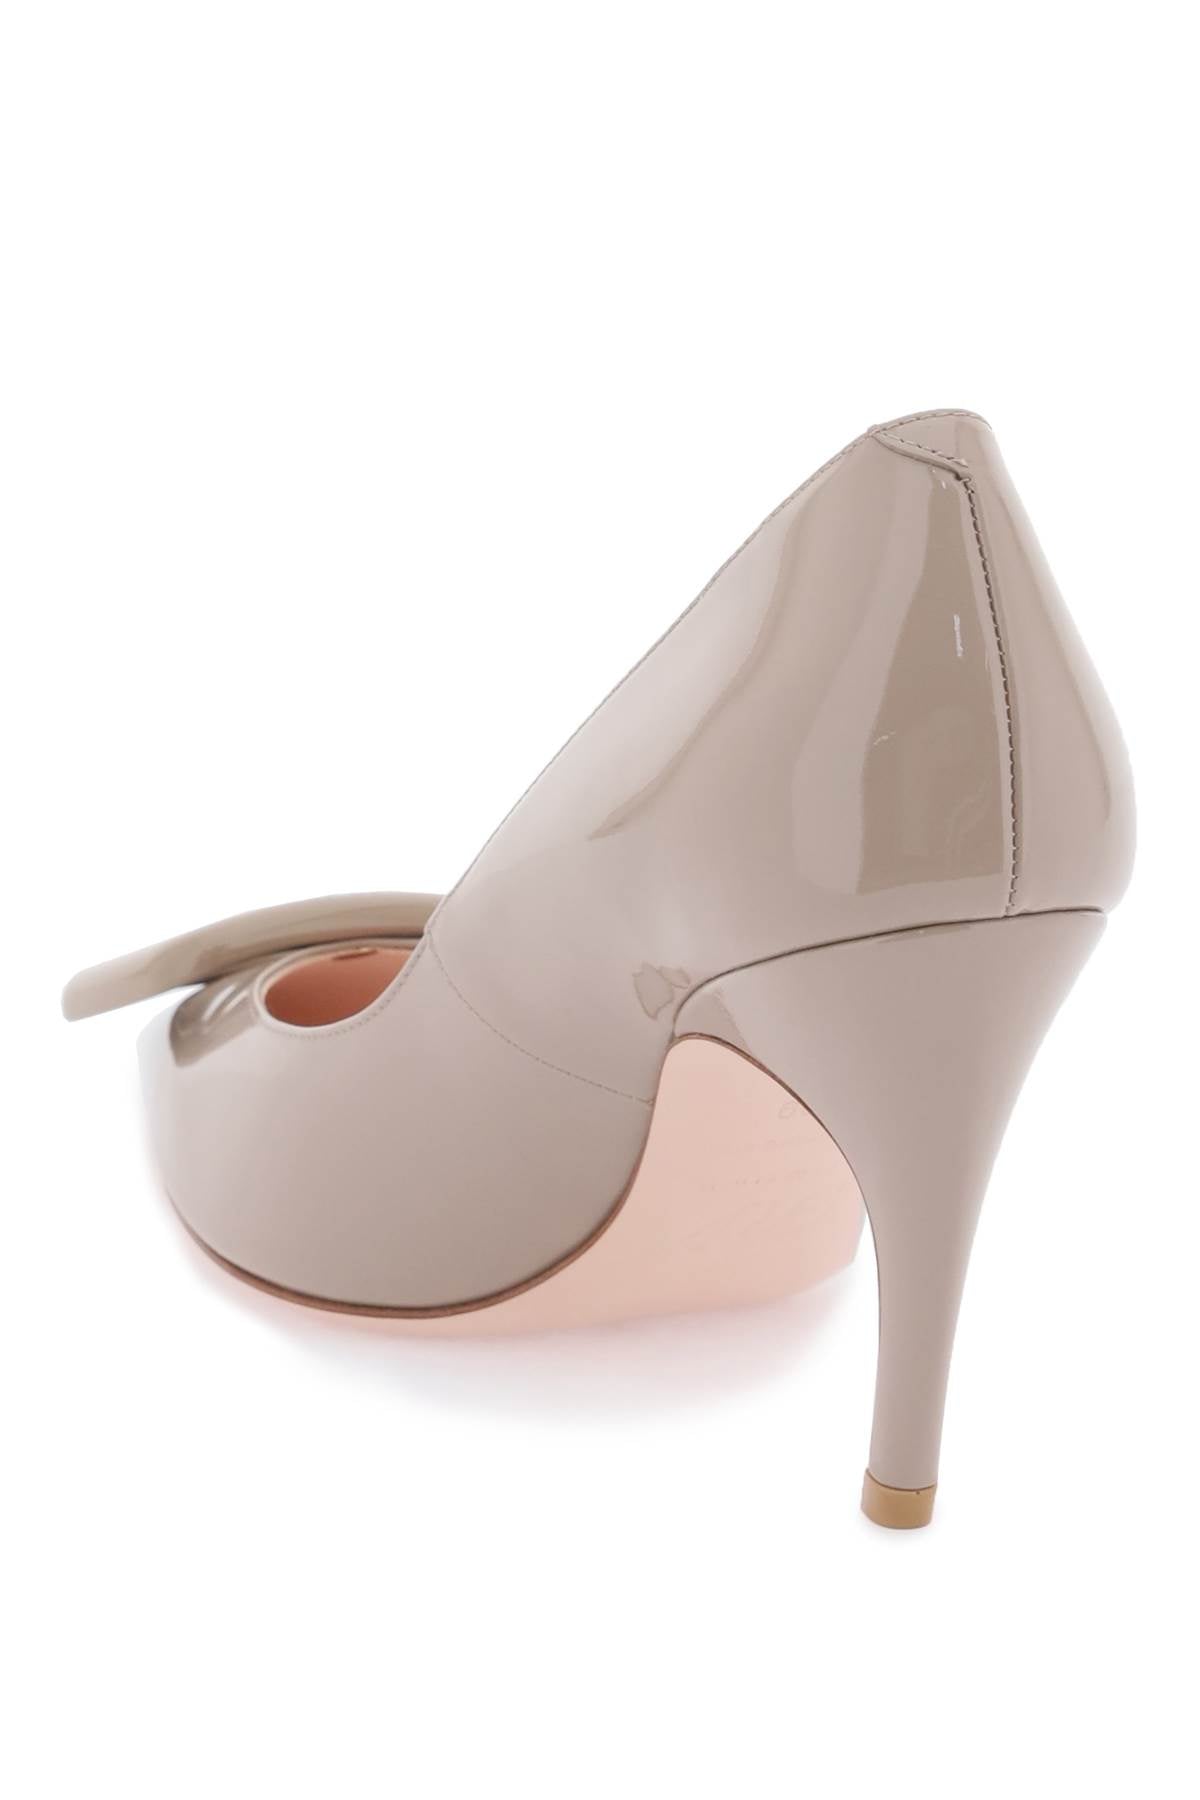 ROGER VIVIER Beige Patent Leather Pumps with Iconic Viv' Choc Buckle and Trompette Heel